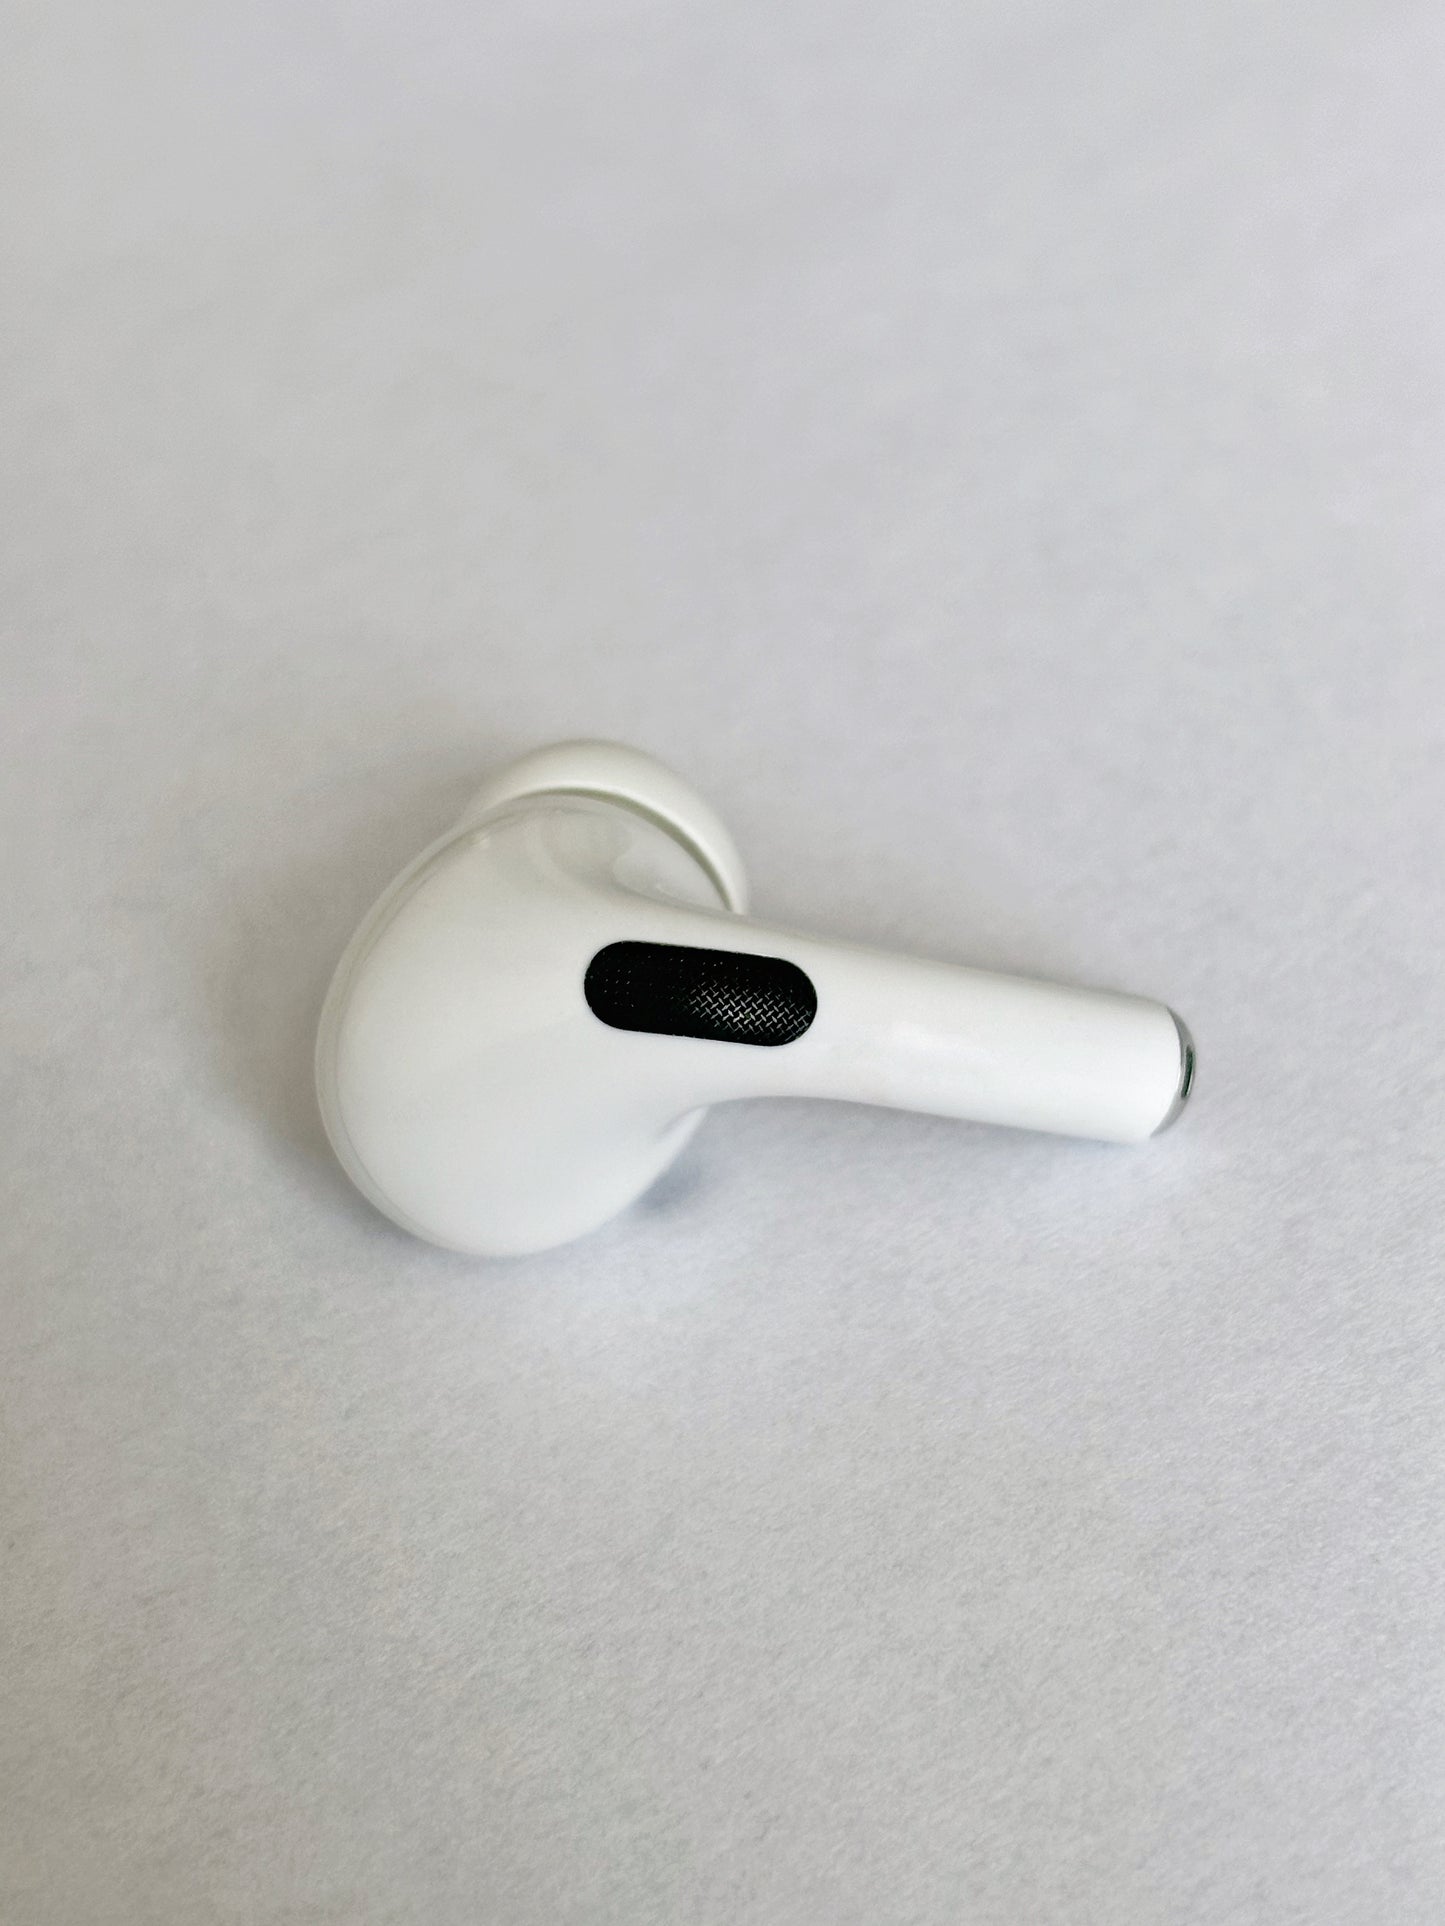 Apple AirPods Pro 1. Generation rechts A2083 Refurbished